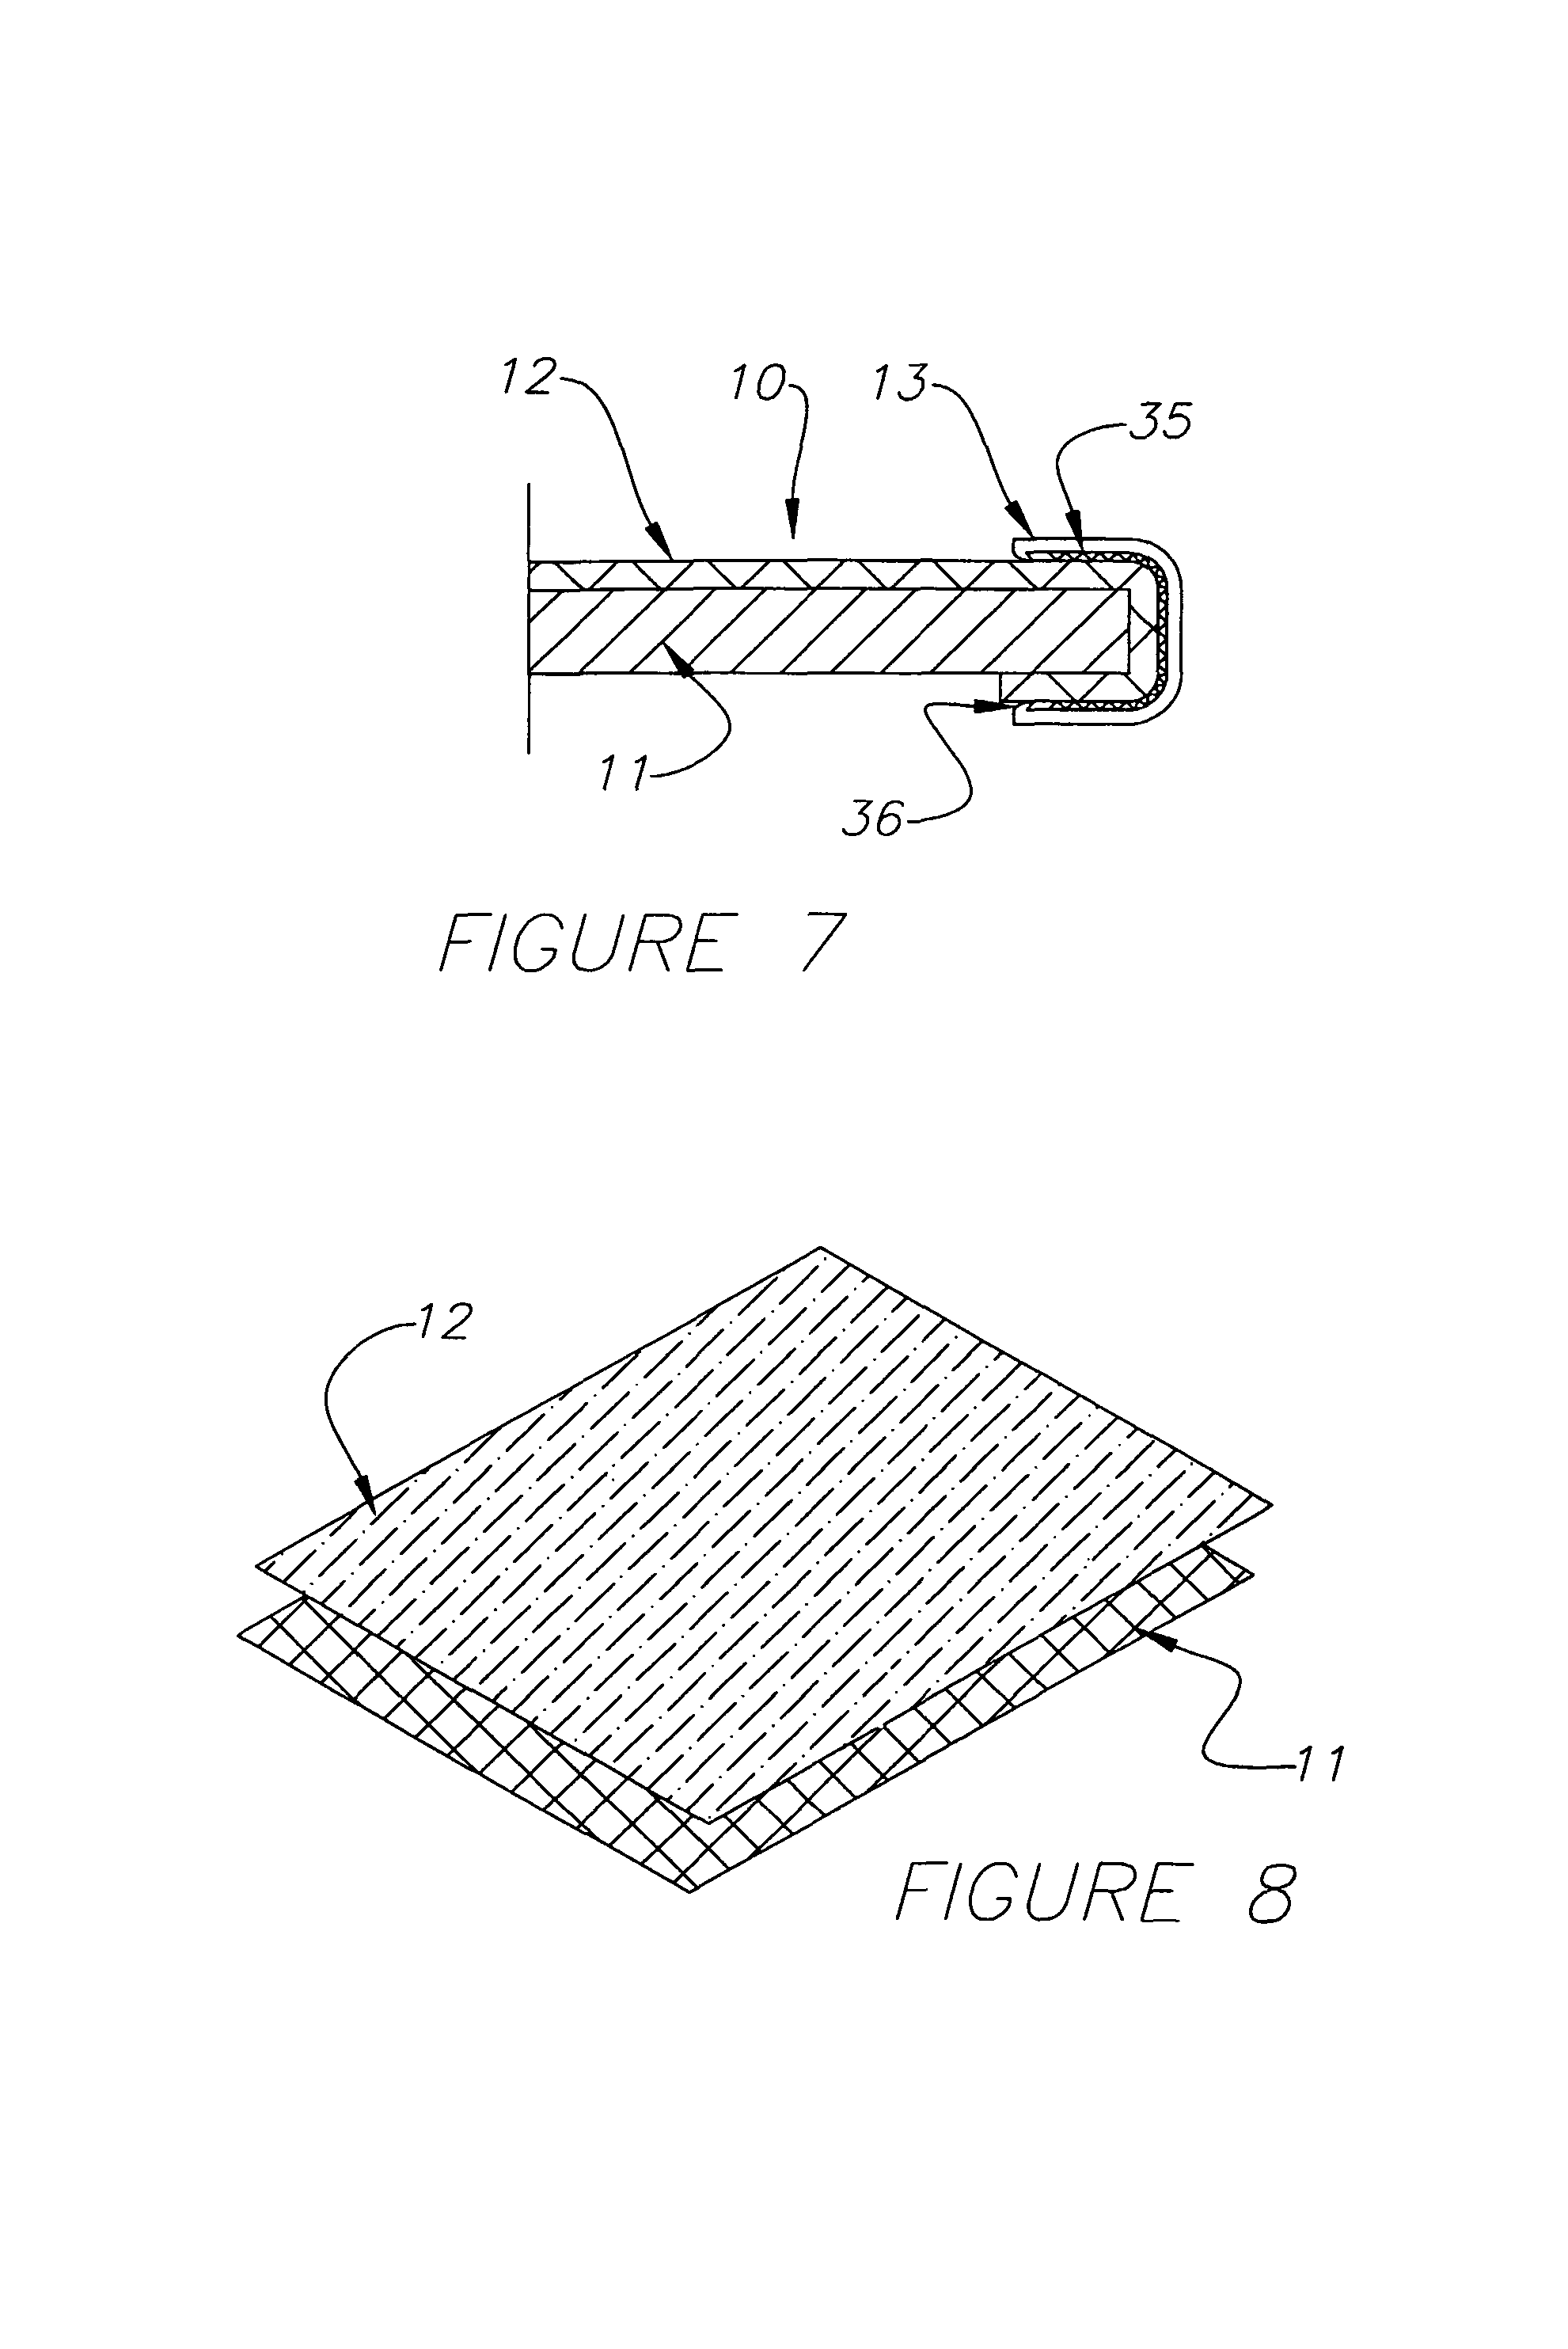 Grate cover apparatus and method